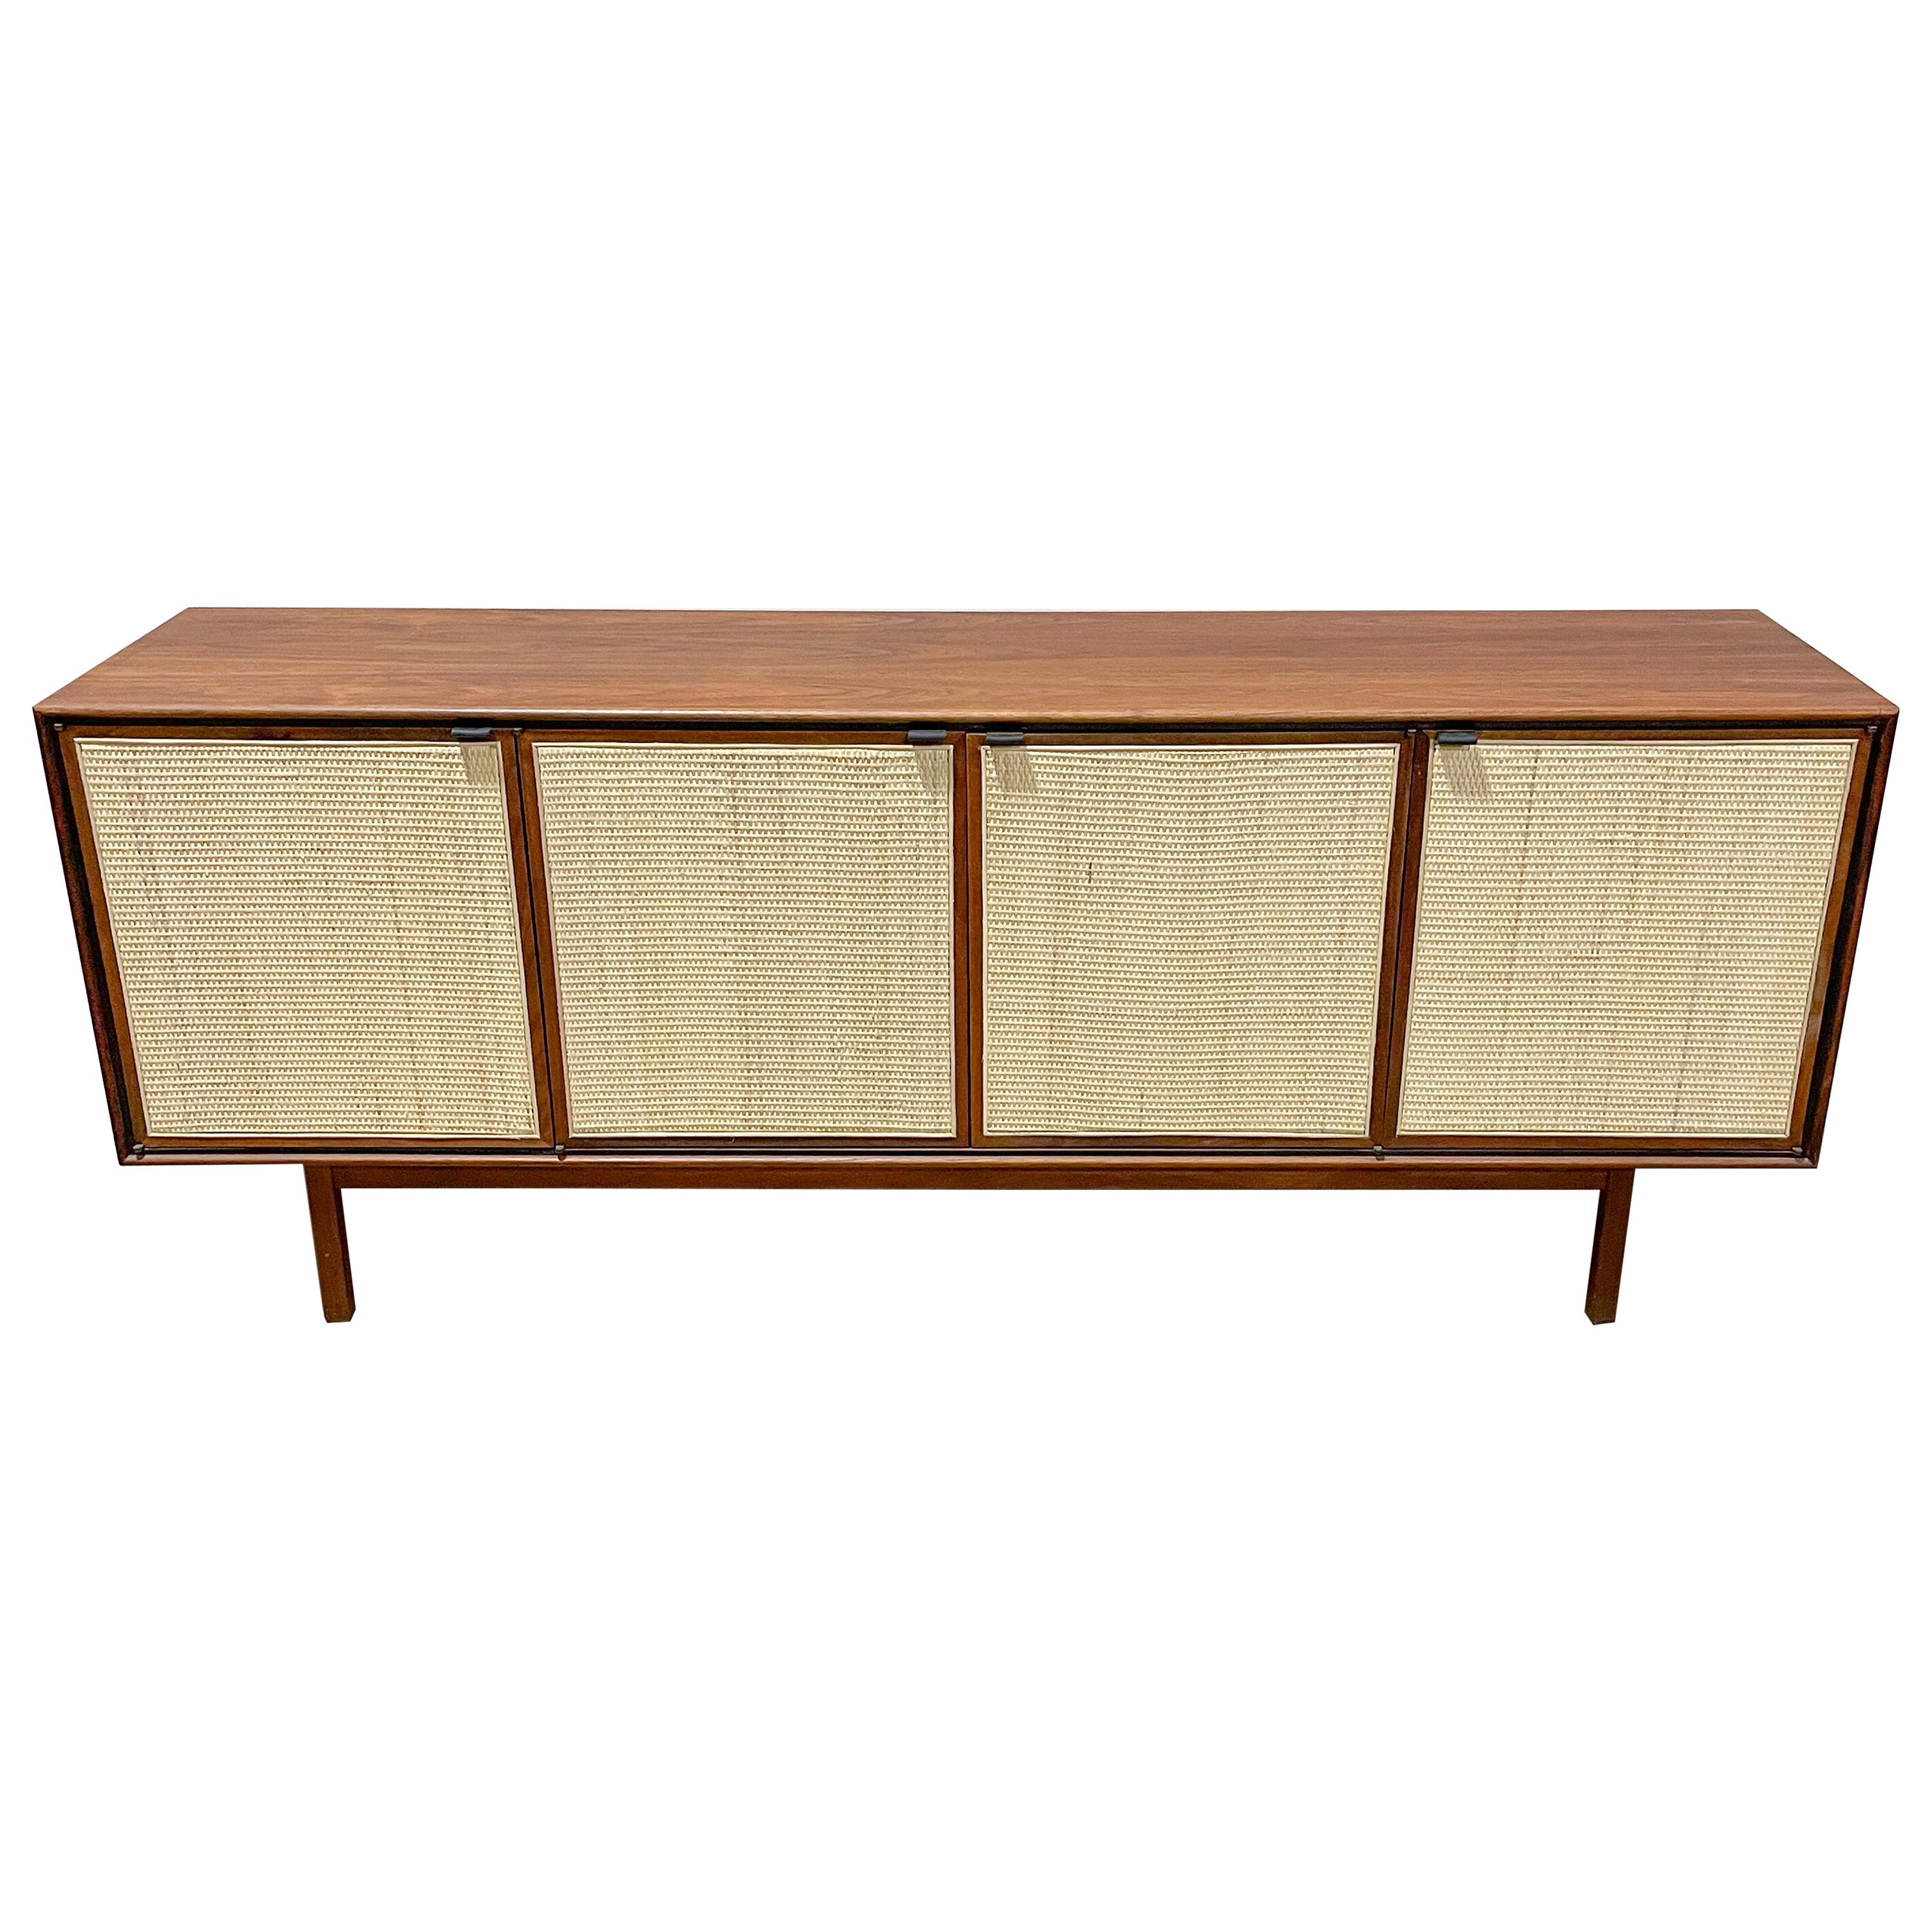 Walnut and Cane Mid Century Modern Credenza by Founders